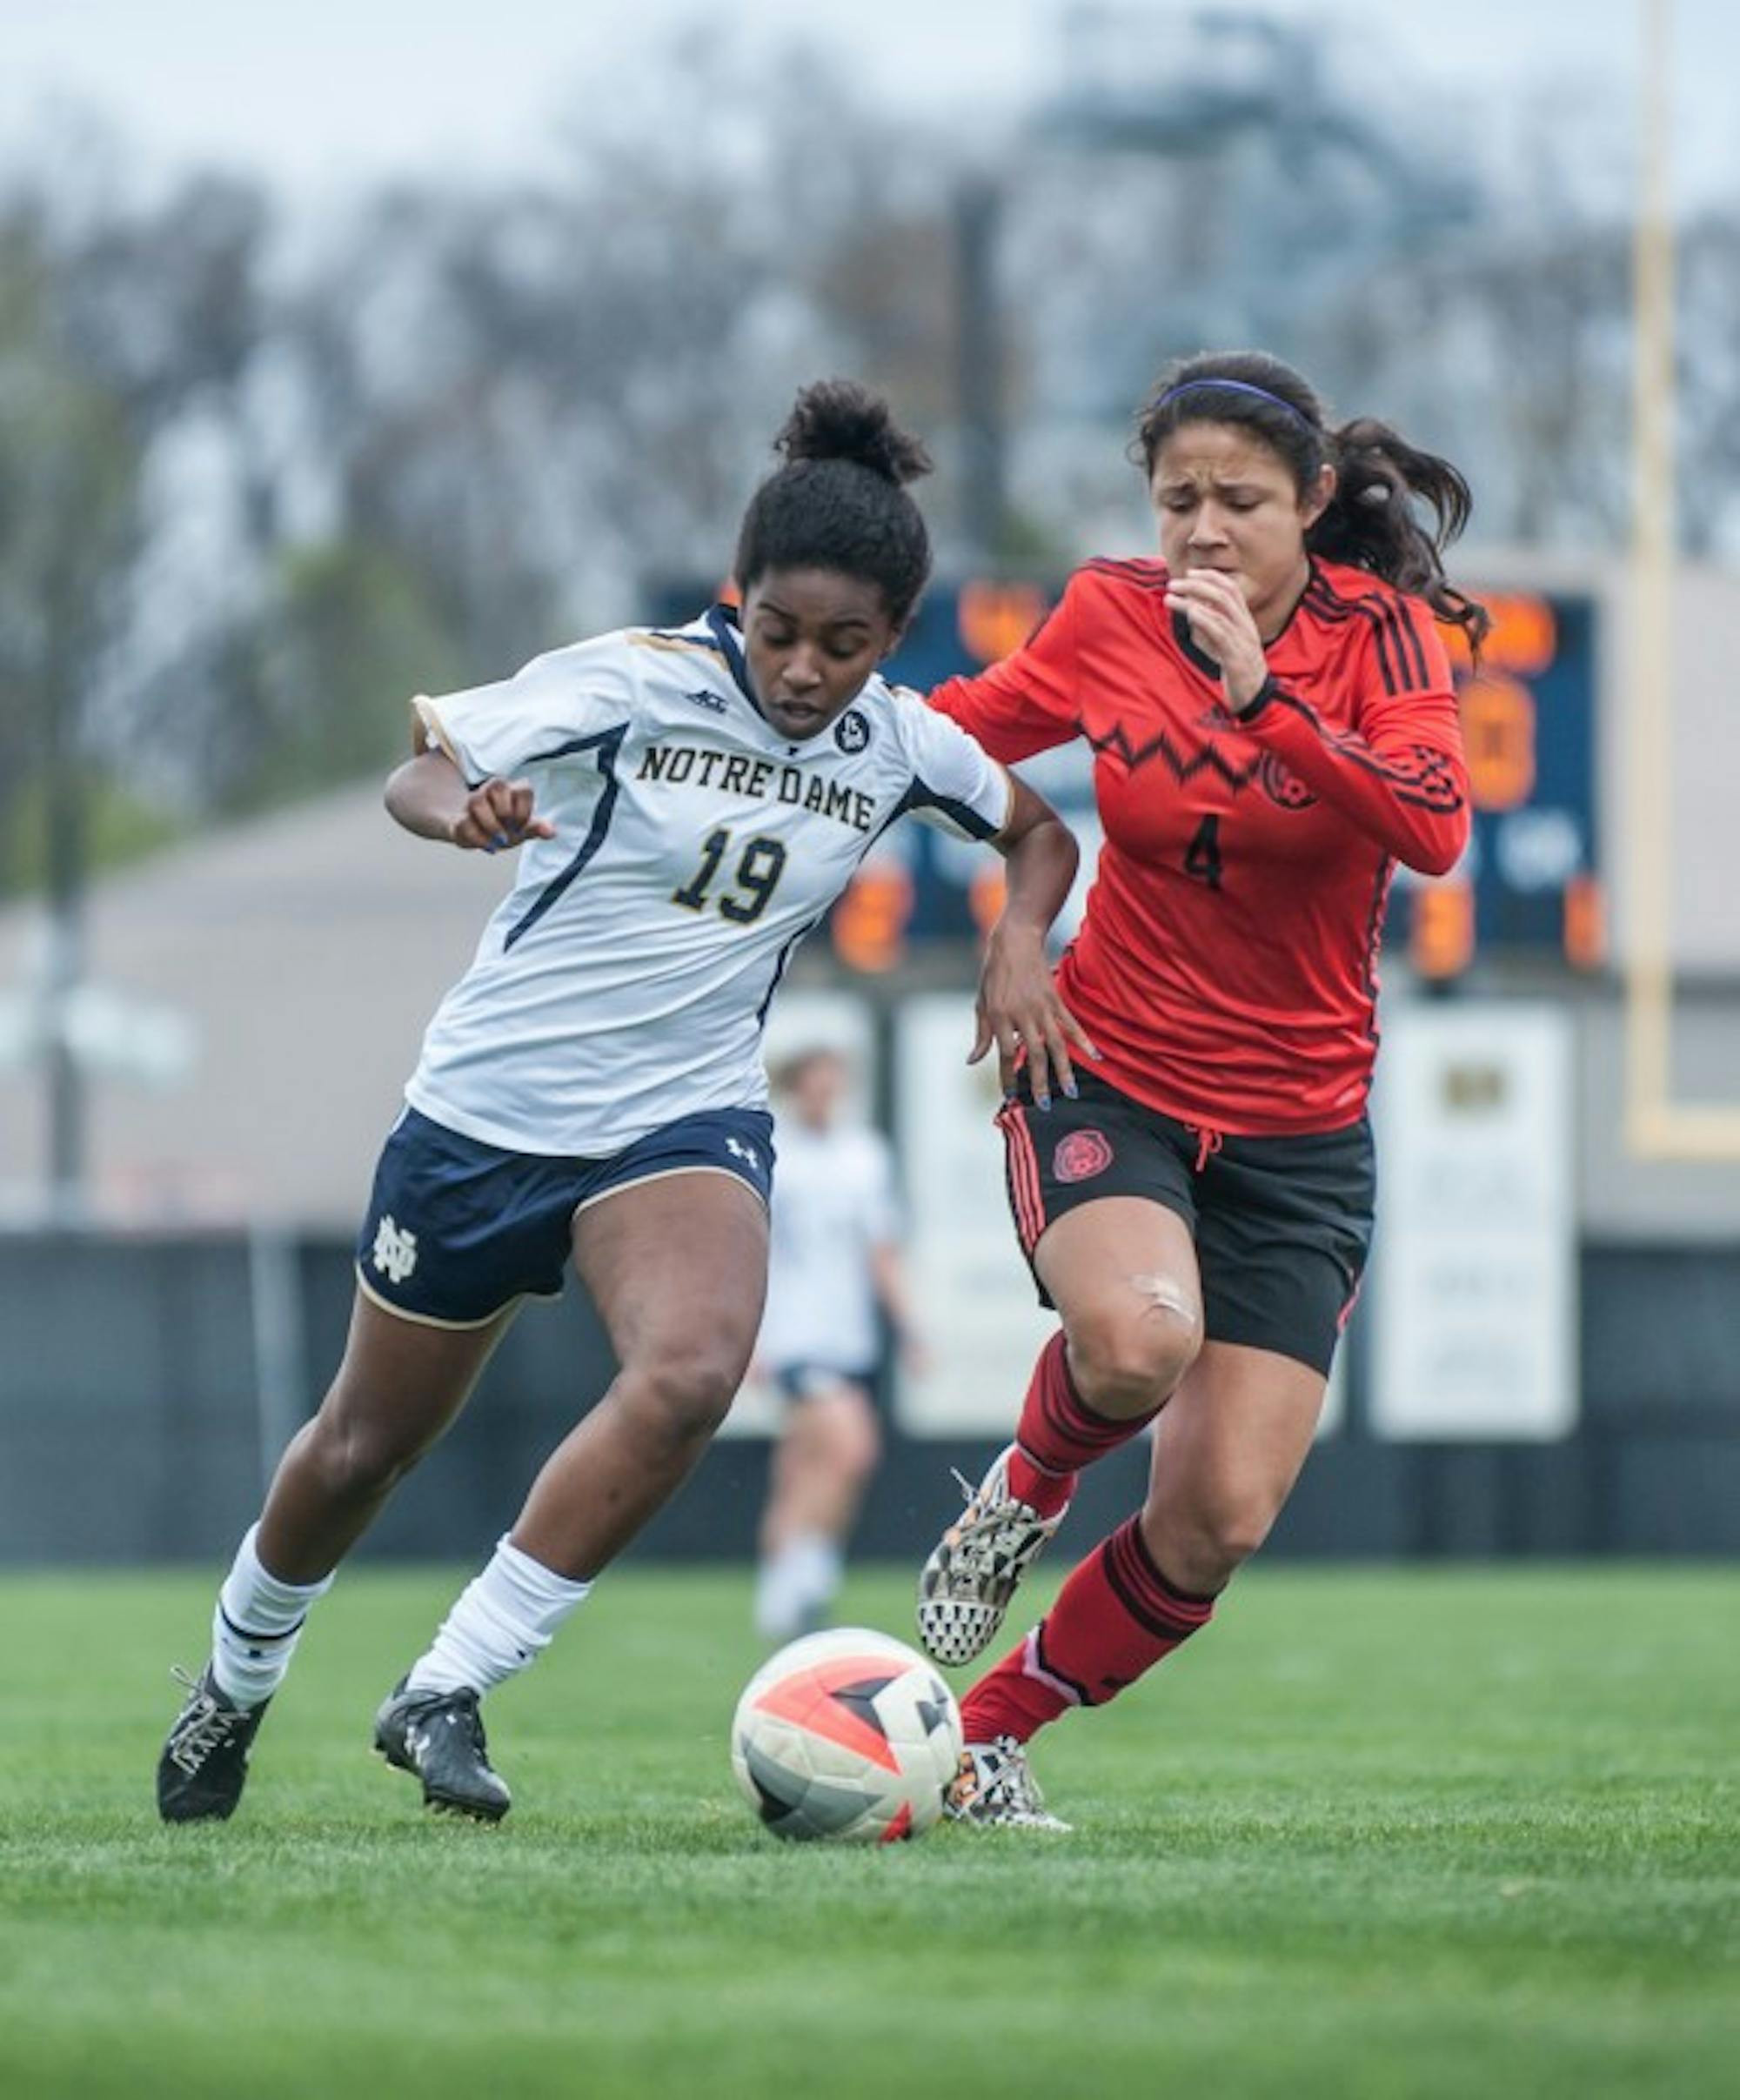 Notre Dame junior midfielder Rilka Noel protects the ball from a defender during a 4-1 victory against the Mexico U-20 National Team on April 24 at Alumni Stadium.